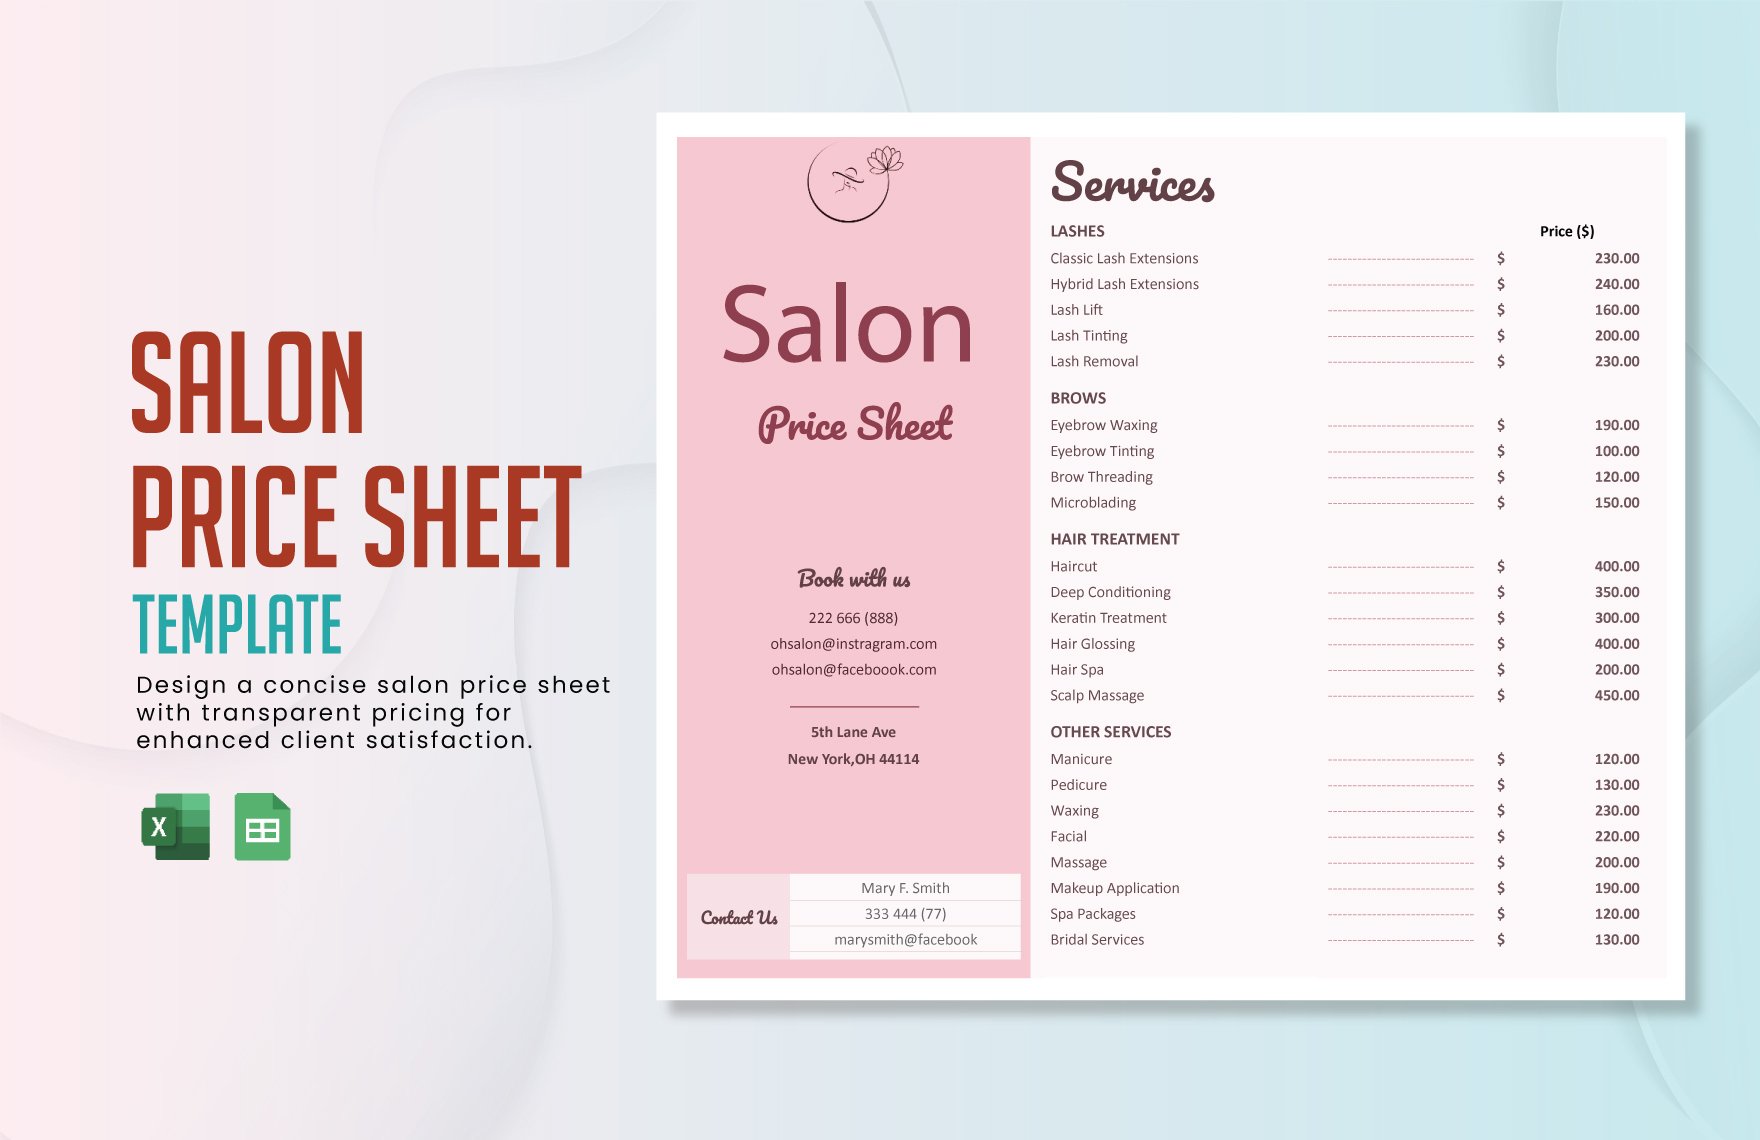 Salon Price Sheet Template in Excel, Google Sheets